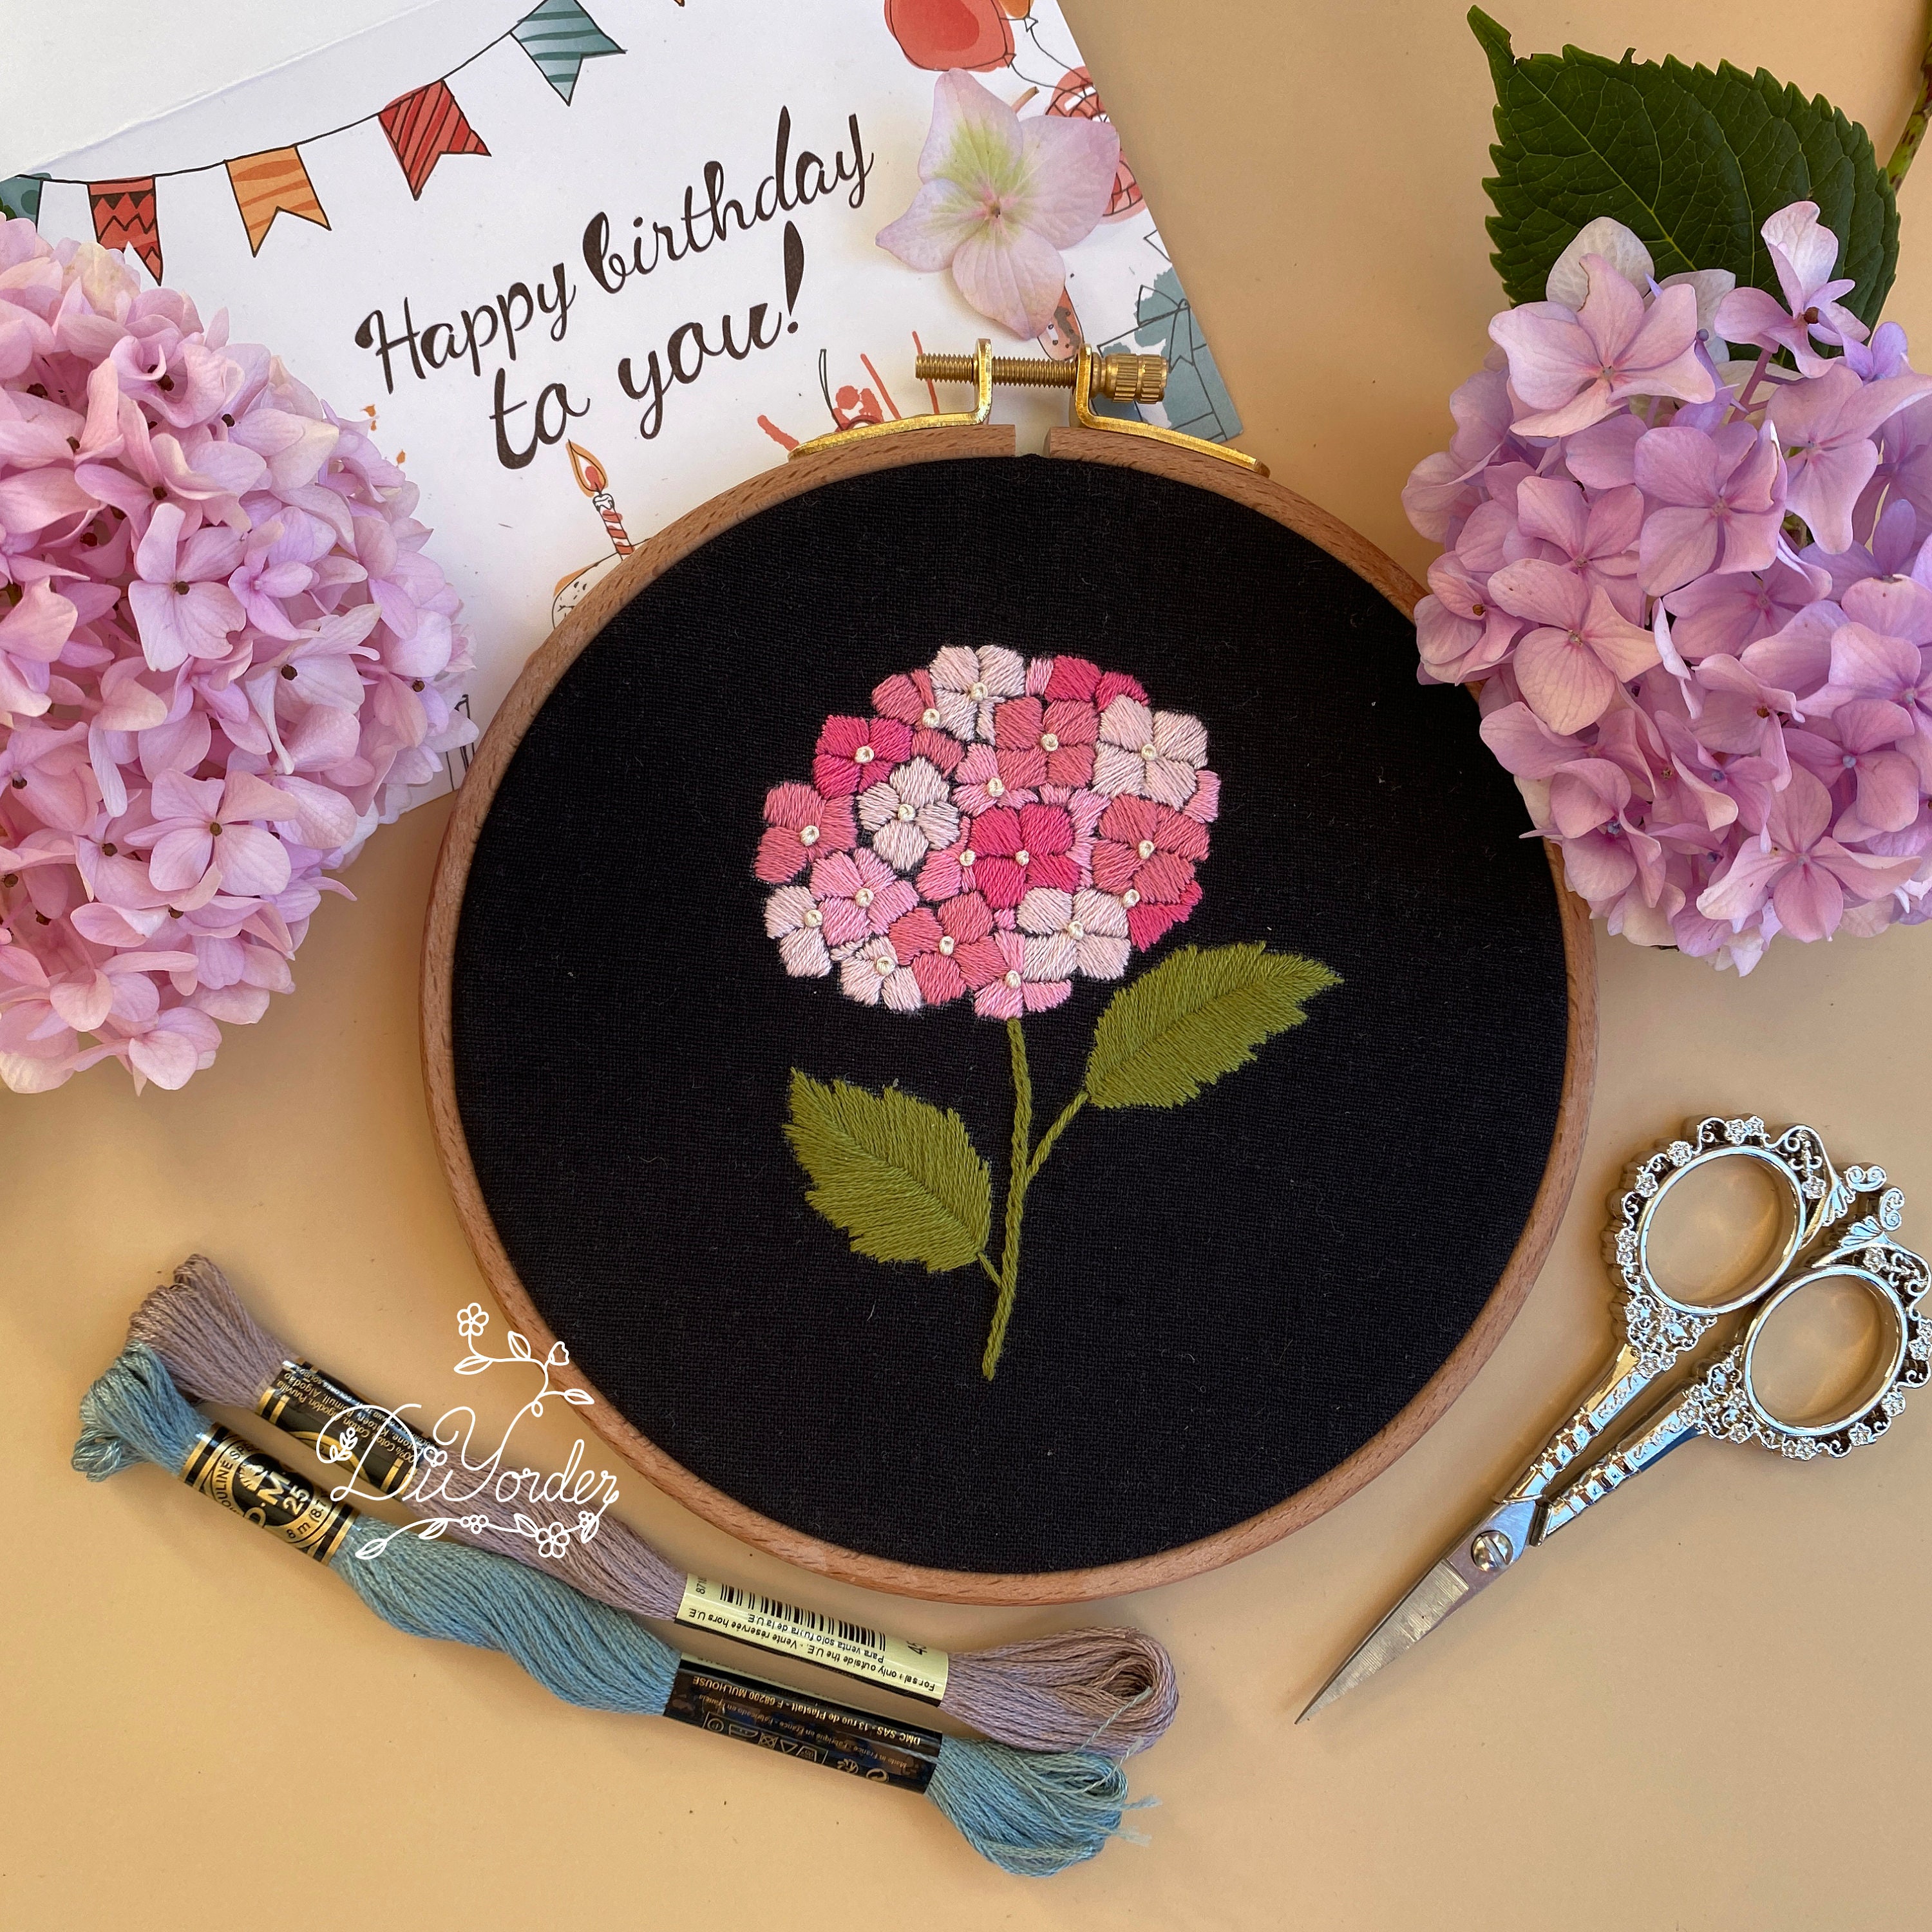 Pink Cosmos Flower Embroidery Kit Flowers Embroidery Kit Botanical  Embroidery Kit Cosmos Flower Needlecraft Kit Floral Embroidery 